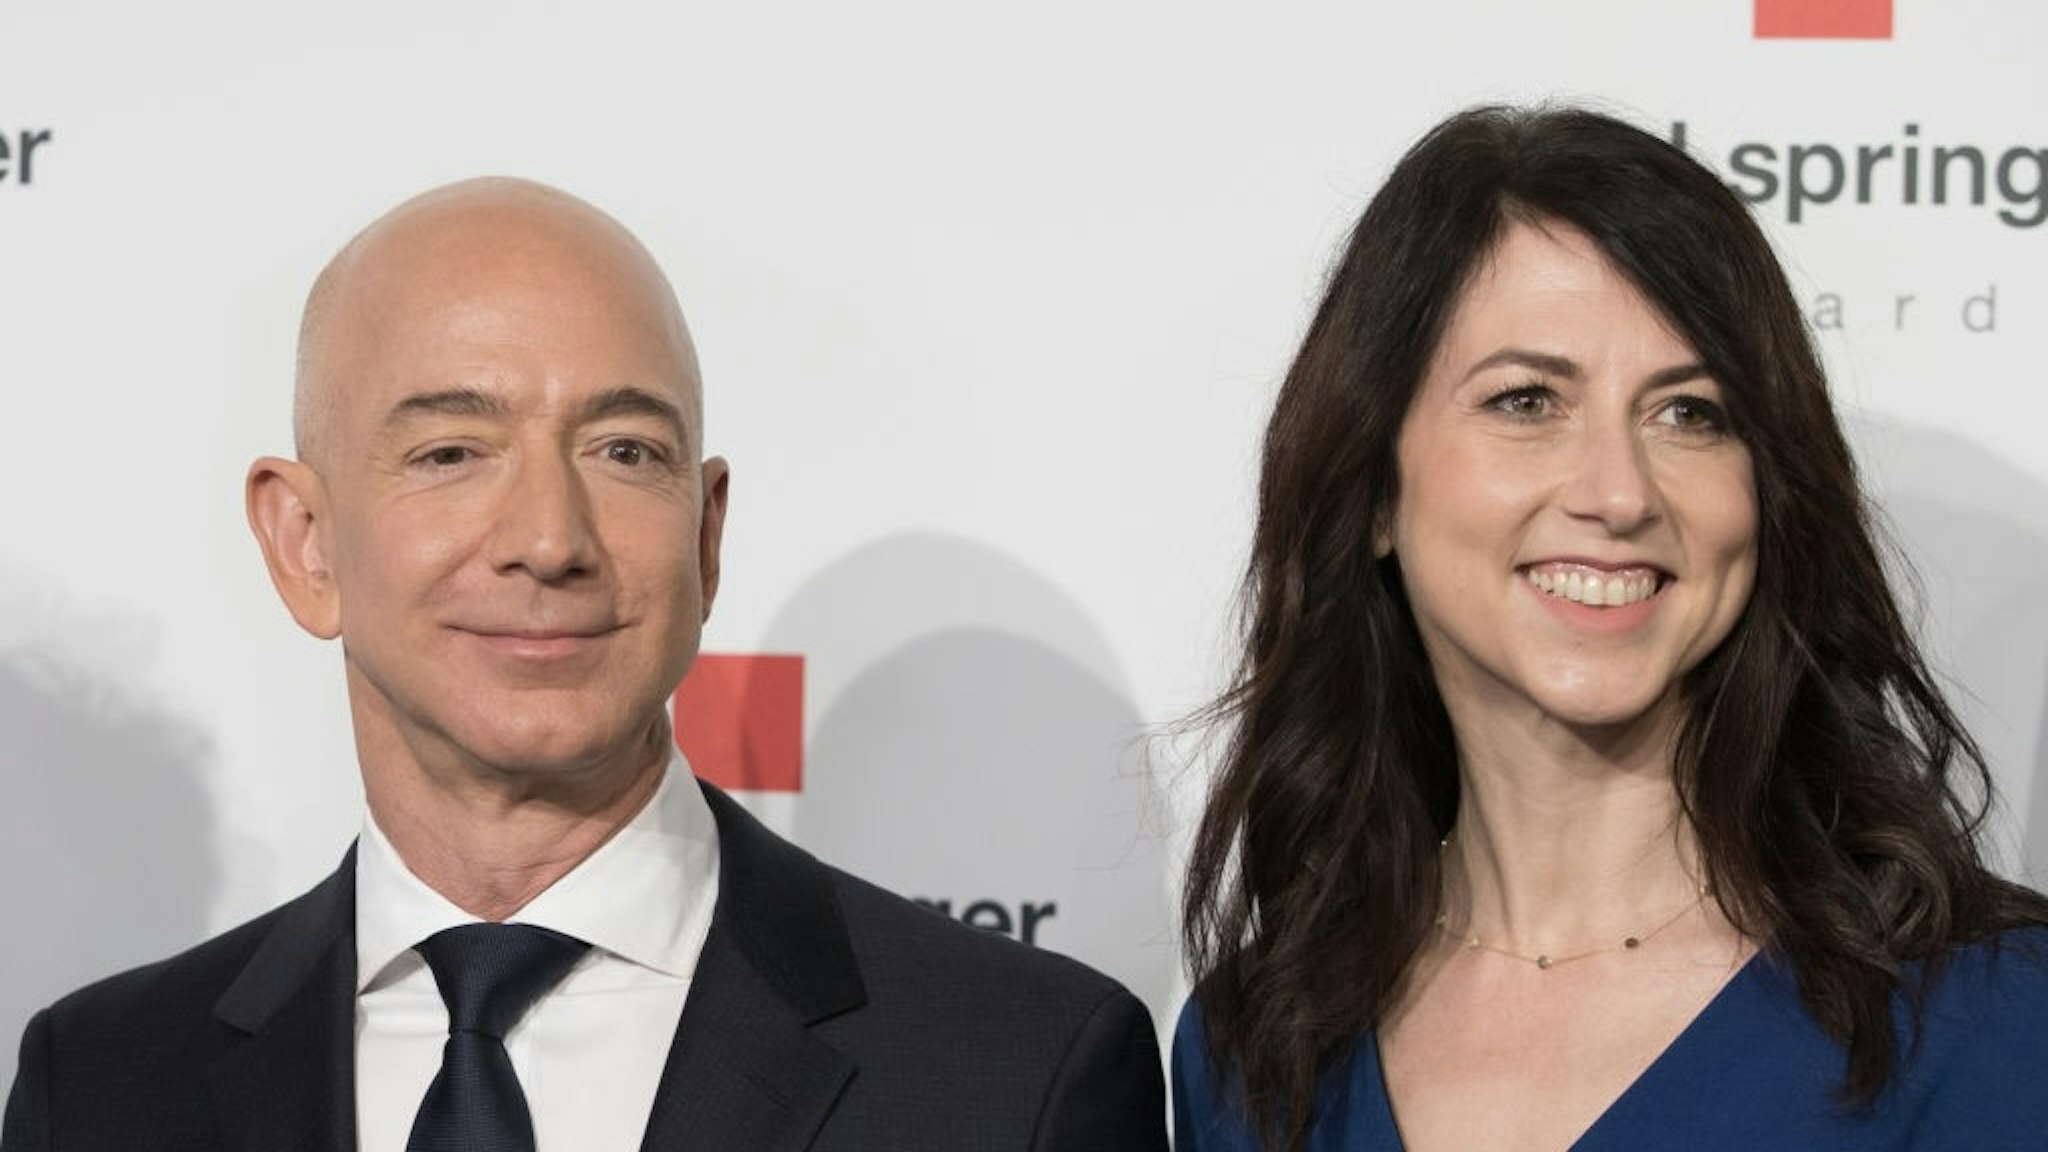 Axel Springer award ceremony 24 April 2018, Germany, Berlin: Head of Amazon Jeff Bezos and his wife MacKenzie Bezos arrive for the Axel Springer award ceremony. Bezos will be receiving the award later. Photo: Jörg Carstensen/dpa (Photo by Jörg Carstensen/picture alliance via Getty Images) picture alliance / Contributor